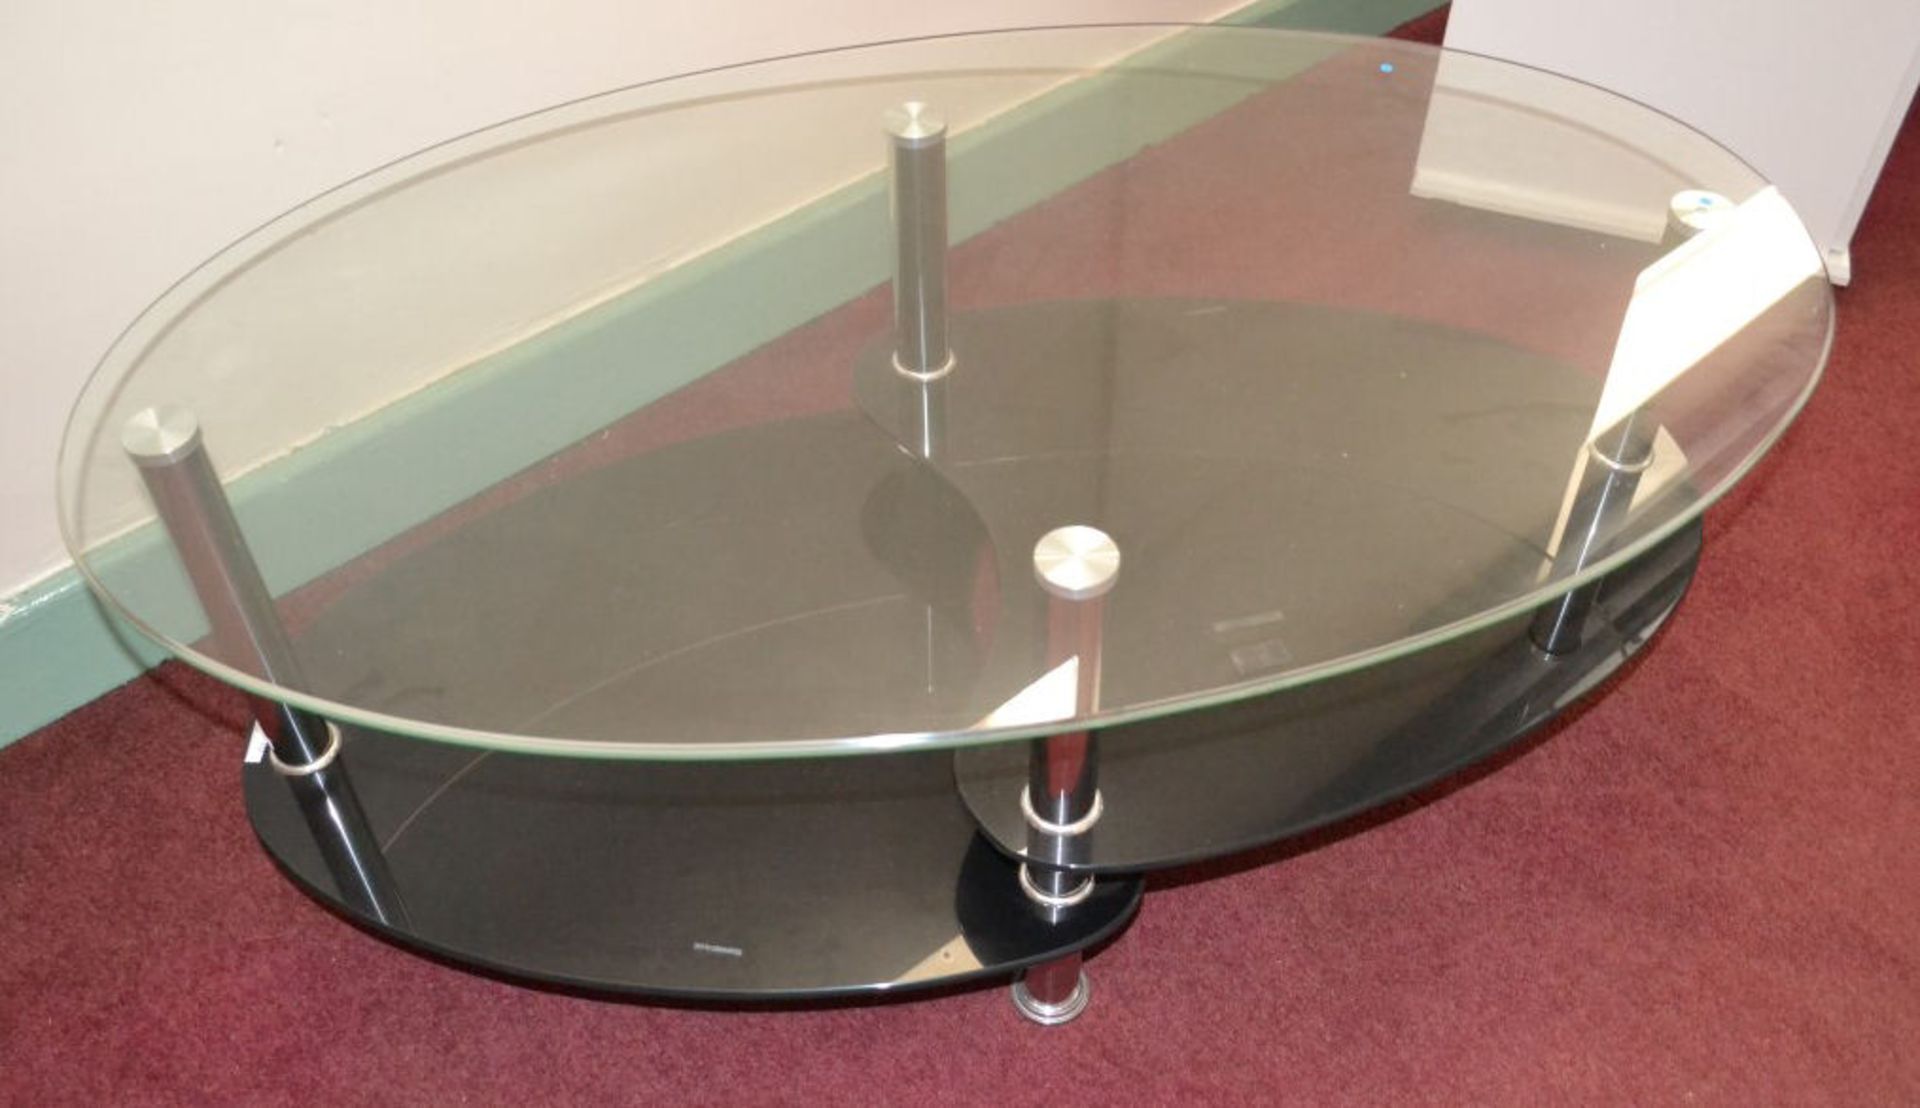 1 x Contemporary Oval Glass and Stainless Steel Coffee Table With 2 Tiered Shelves - Image 4 of 4